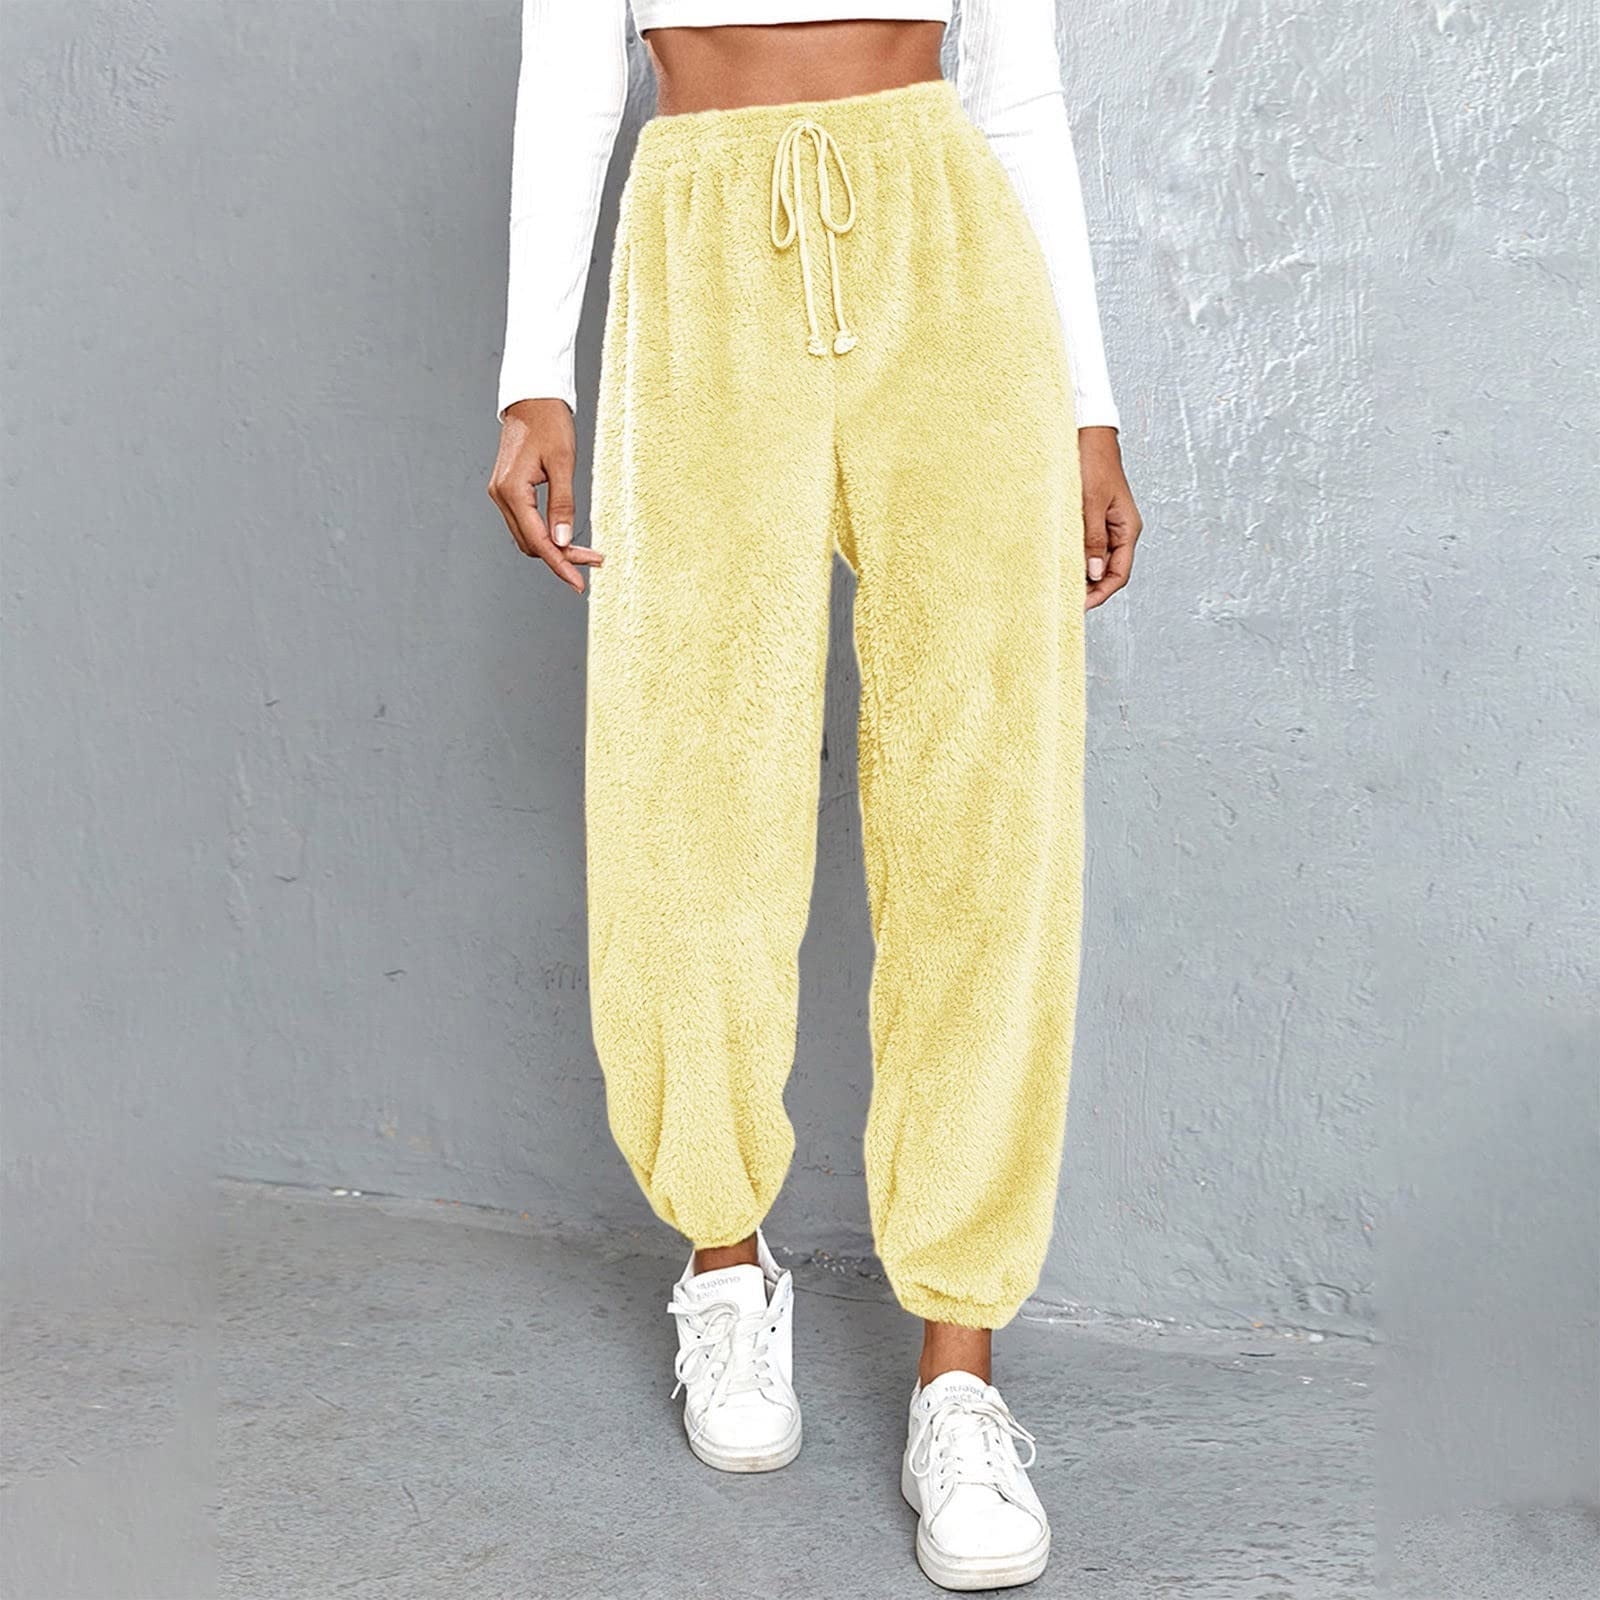 High Waist Harem Sweat Cropped Pants For Women Black And White Streetwear  Joggers, Winter Loose Track Cropped Pants T200727 From Xue04, $15.78 |  DHgate.Com